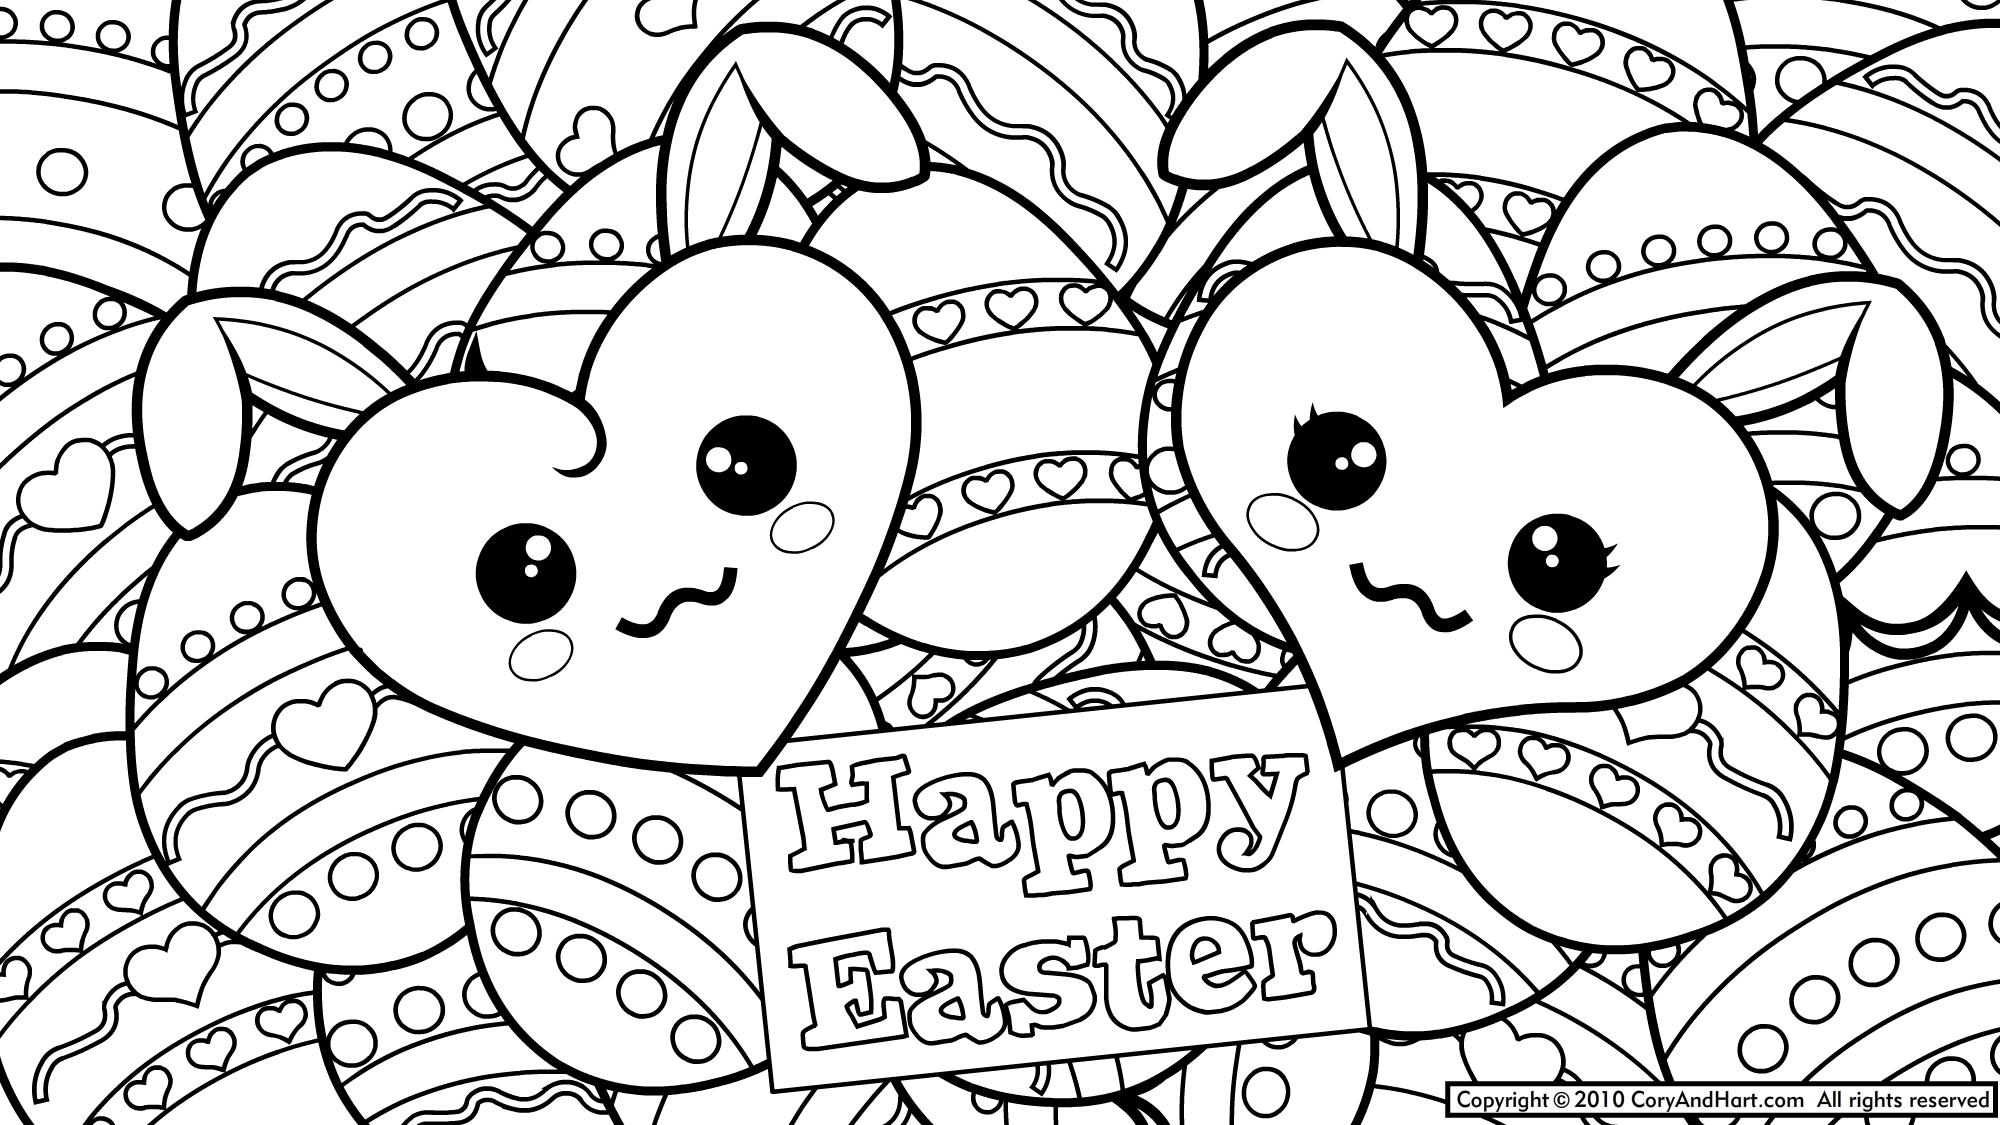 Bunnies Coloring Pages Love | Coloring Pages For All Ages